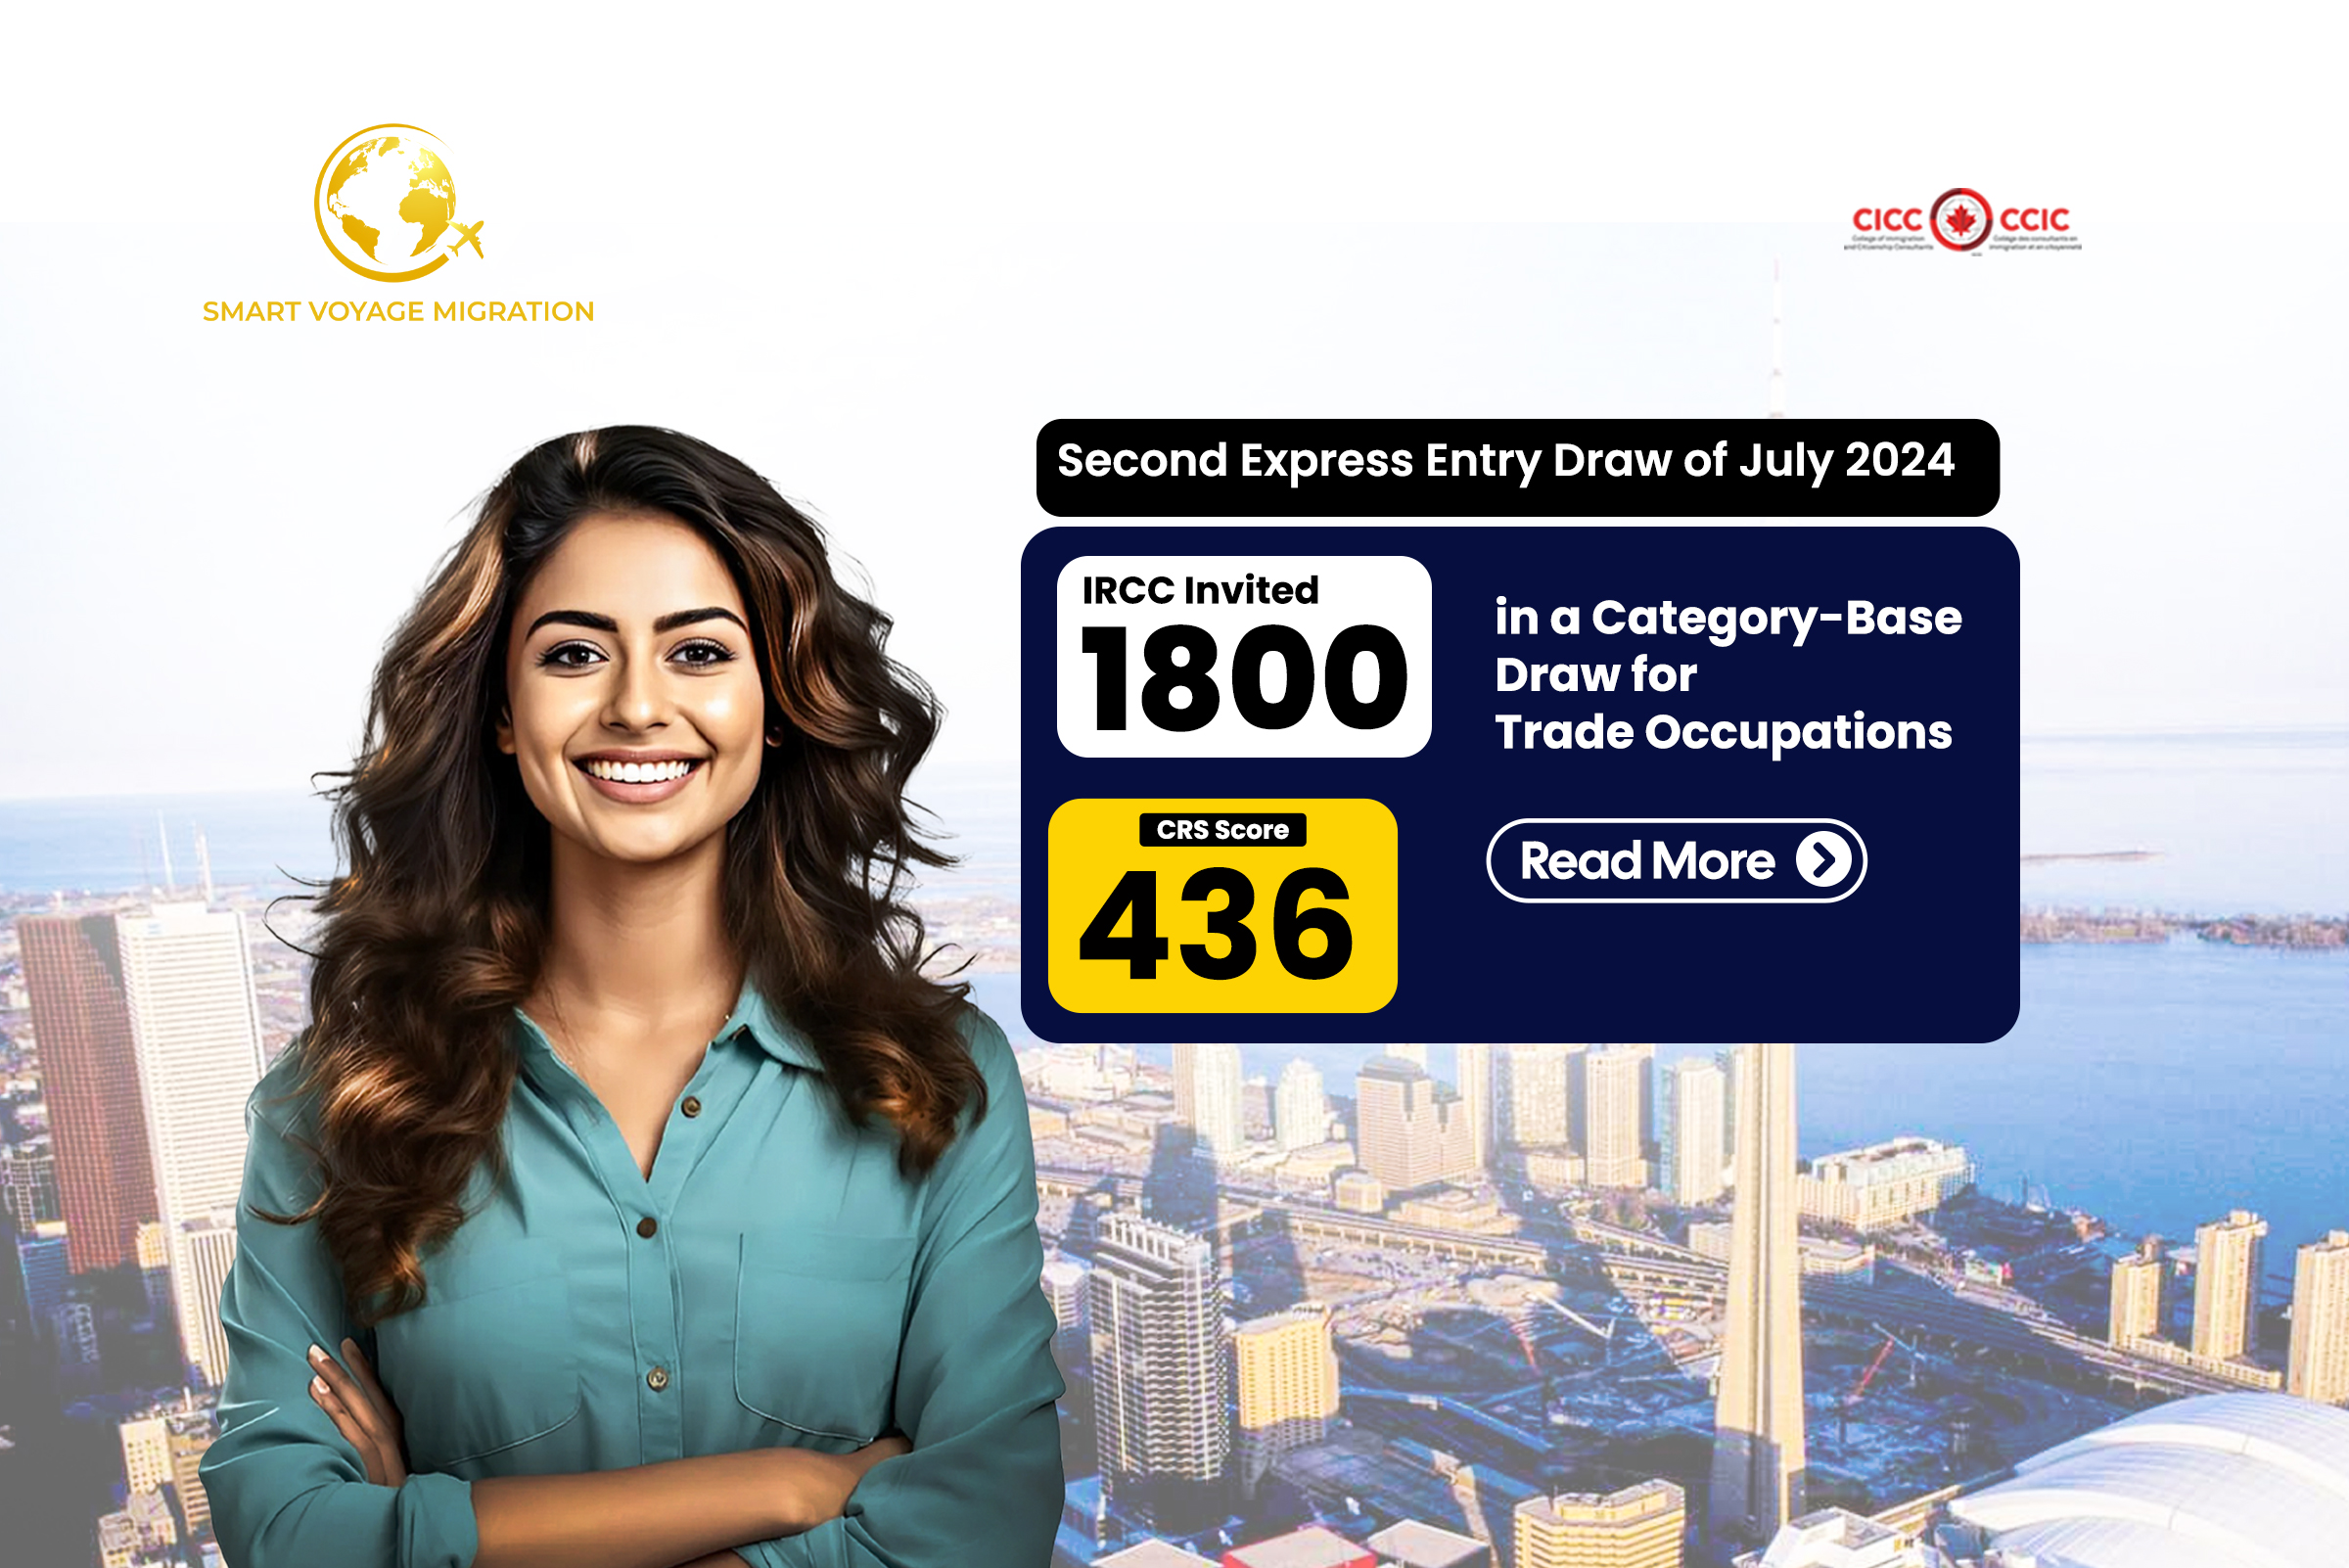 Latest Express Entry Draw of July 2024 – IRCC Issues 1800 Invitations to Apply in a Category-Based Draw